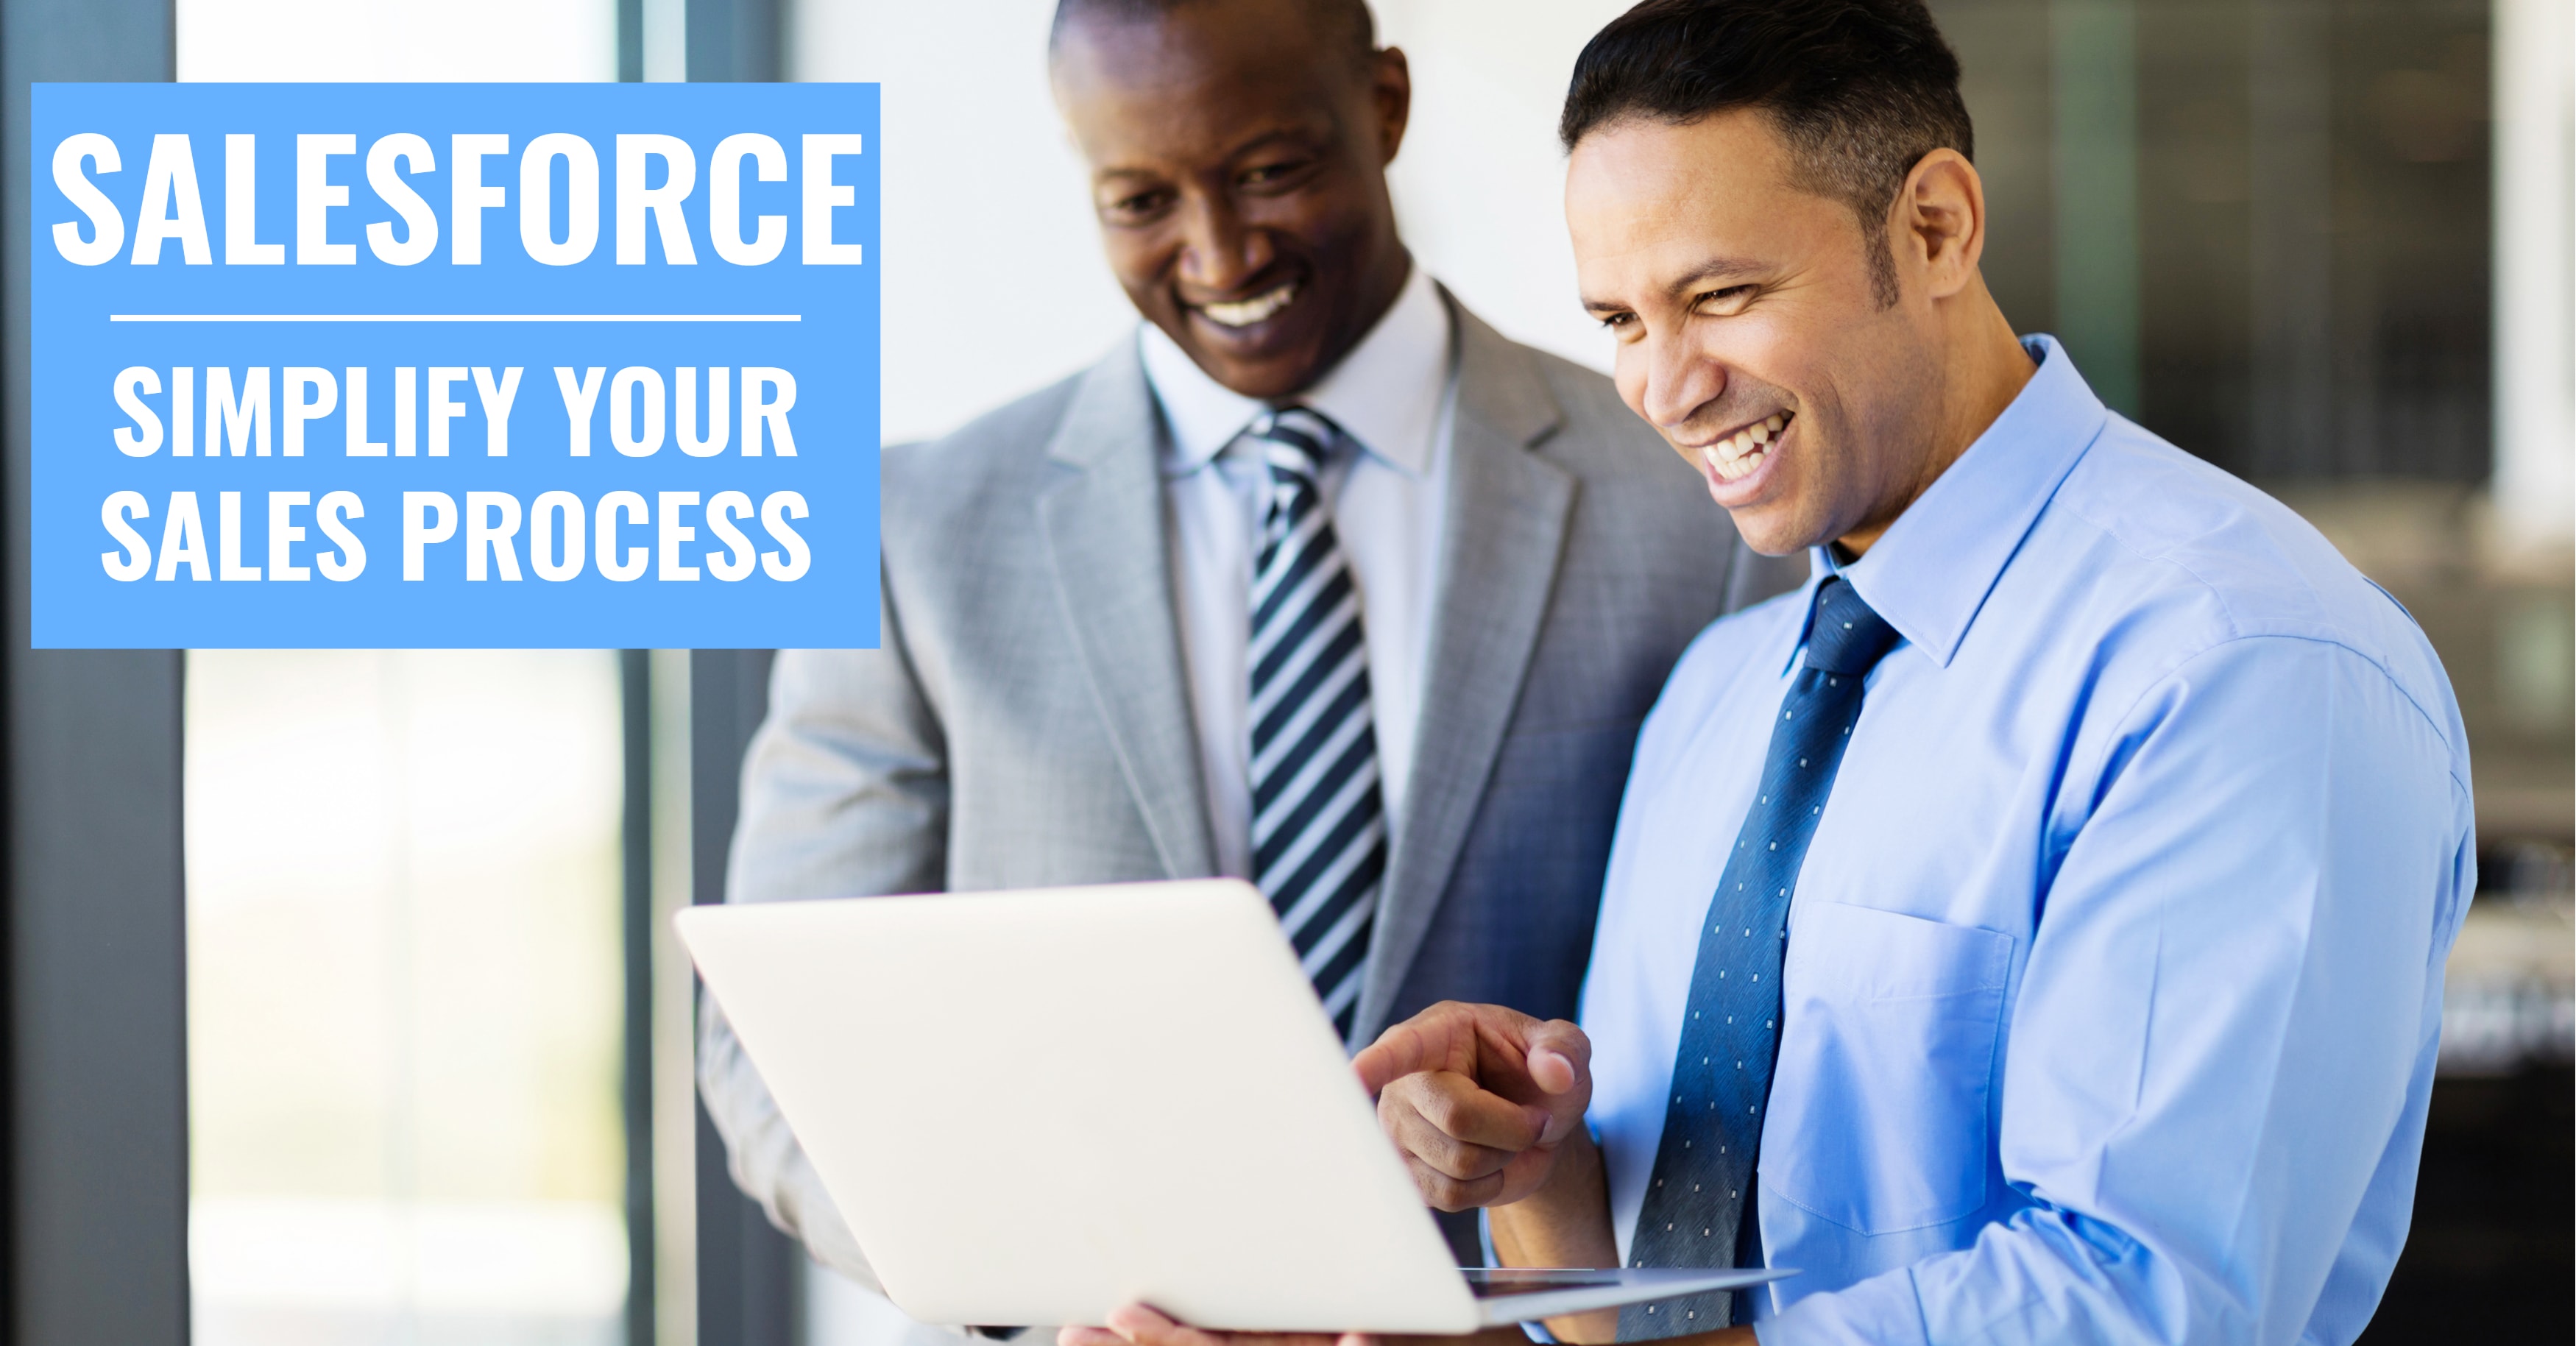 How Does Salesforce Simplify Your Sales Process?